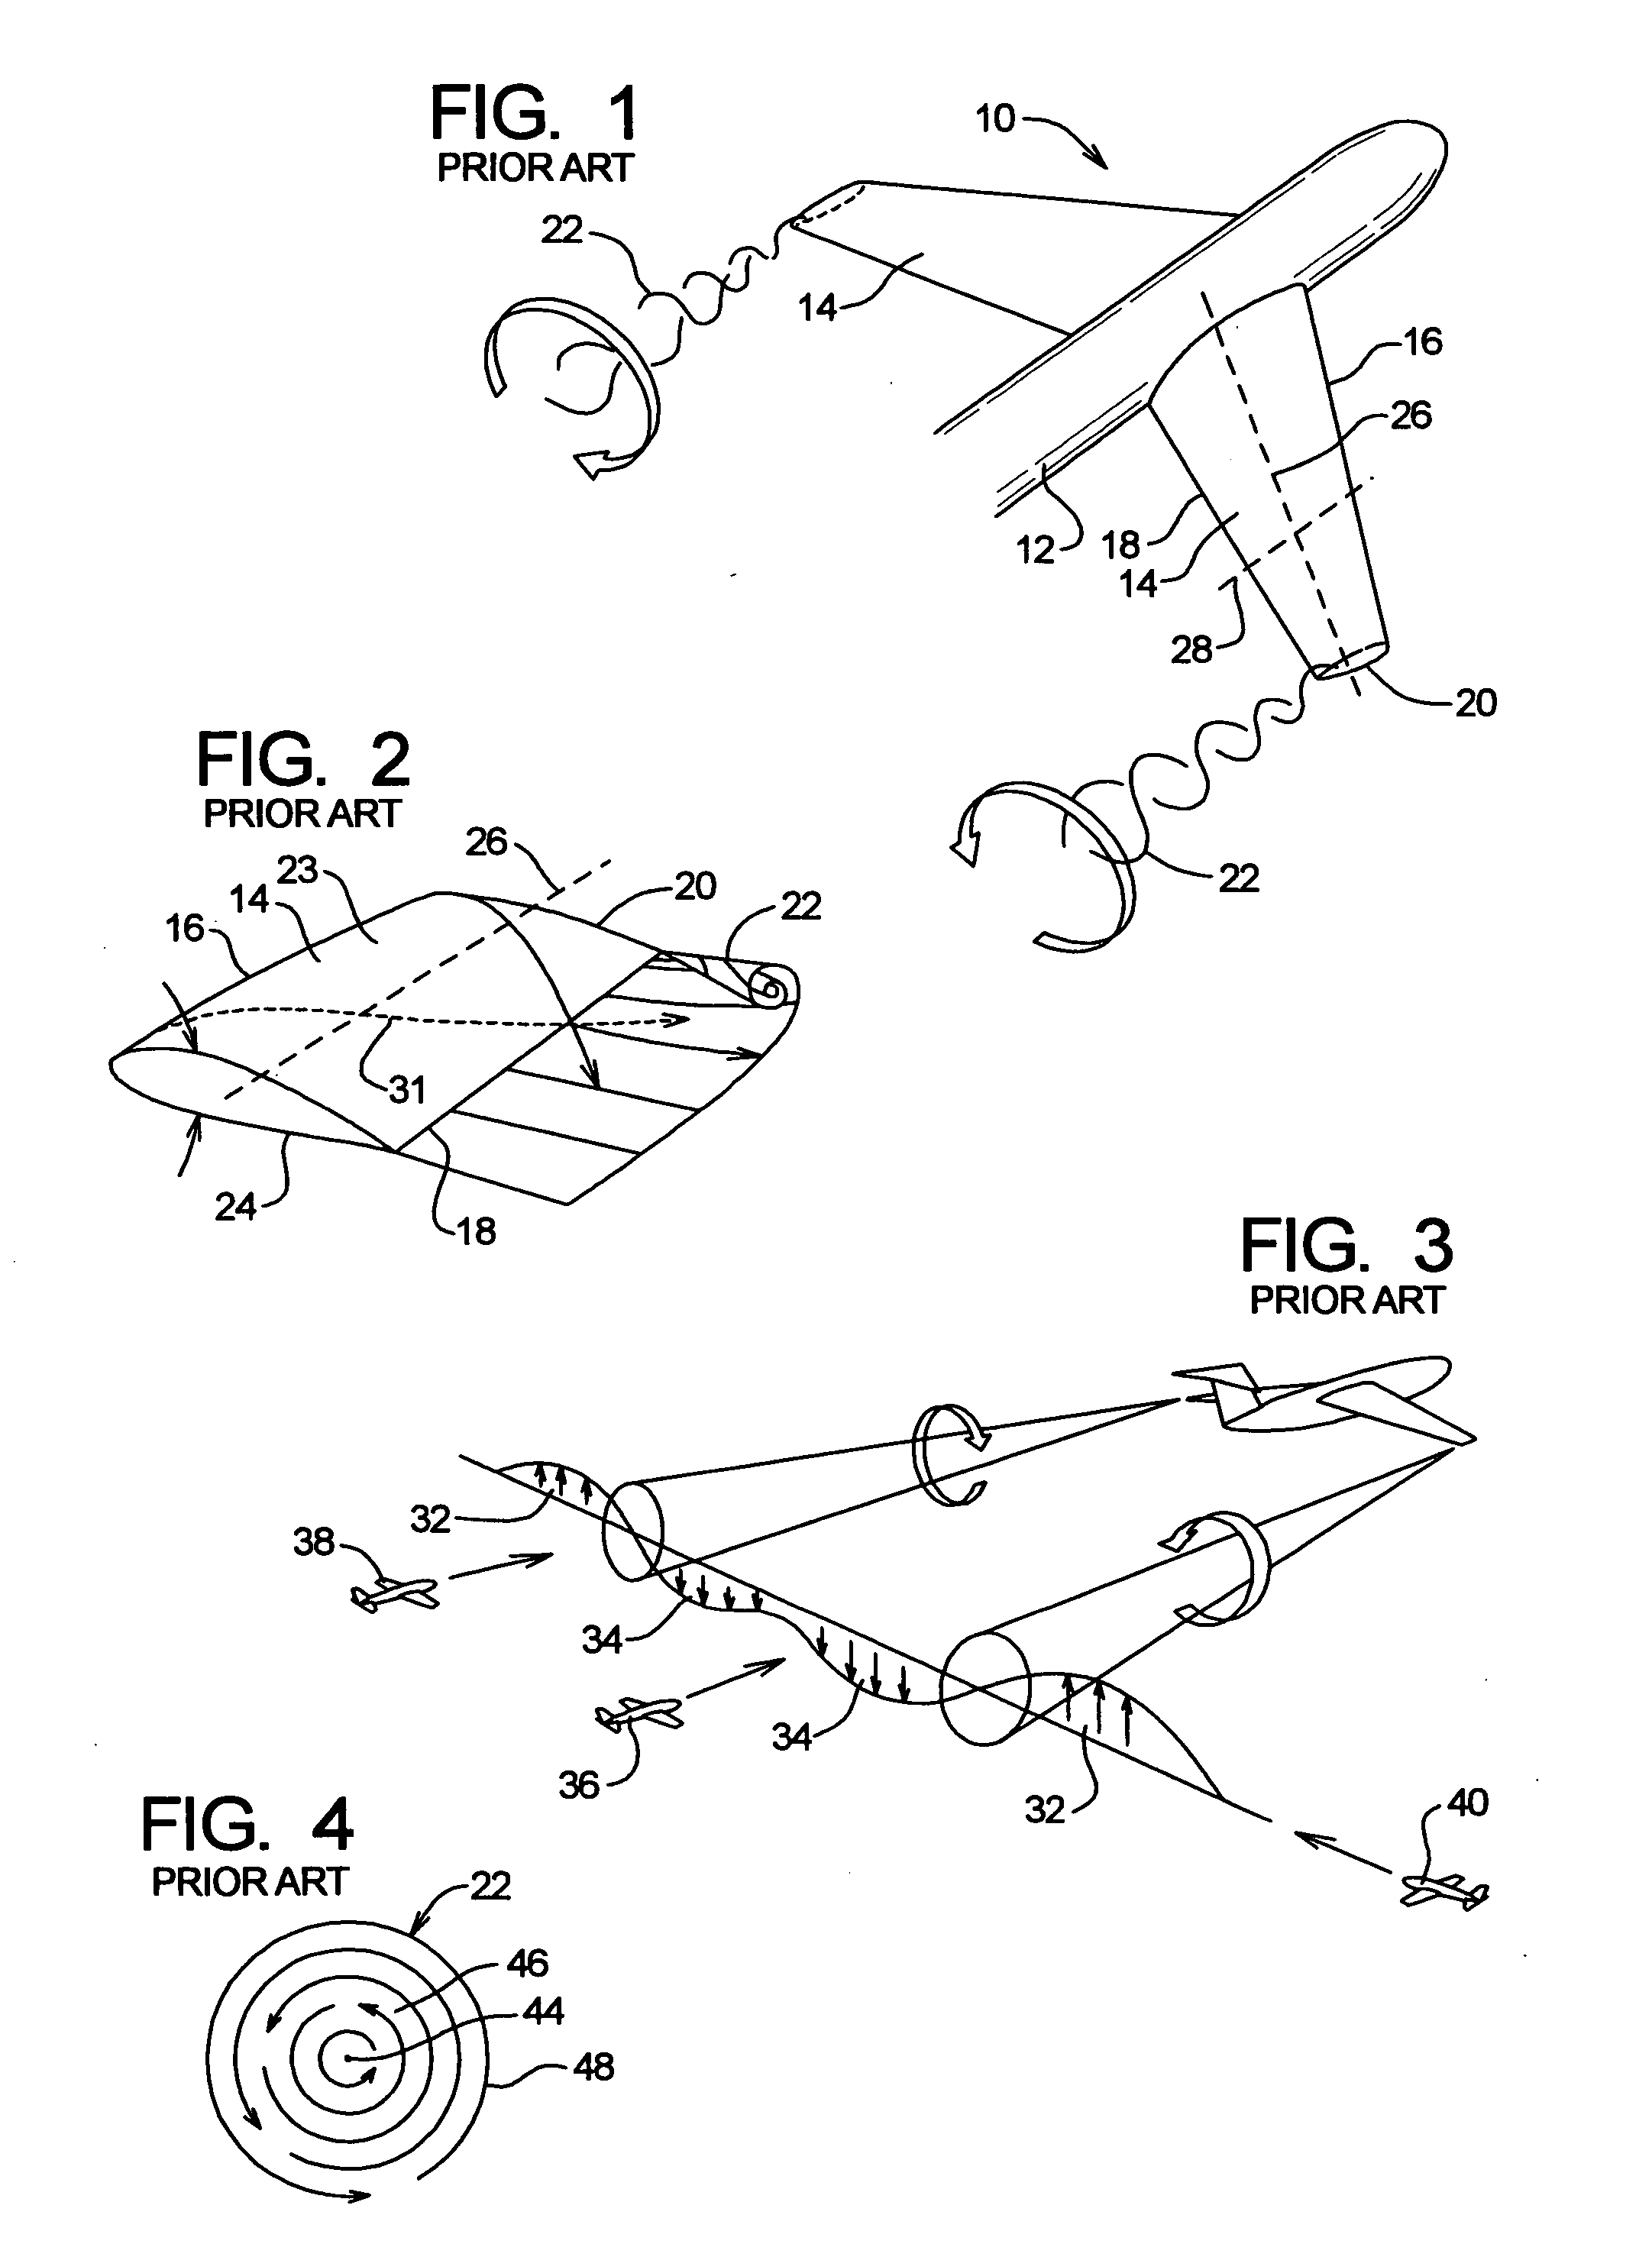 Apparatus and method for the control of trailing wake flows